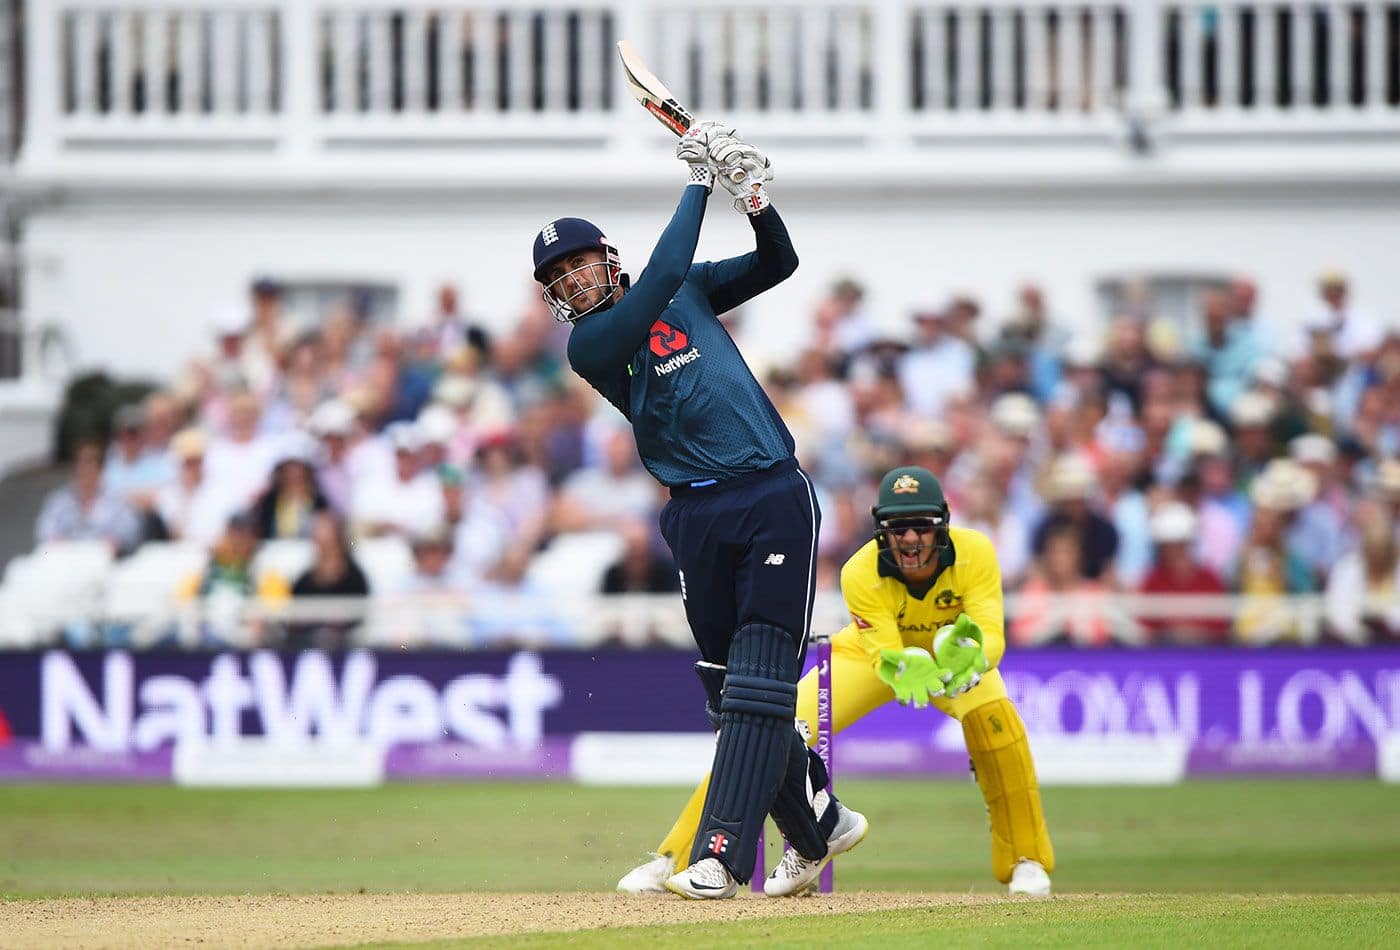 ICC World Cup 2019: Alex Hales to join England squad despite being on personal break